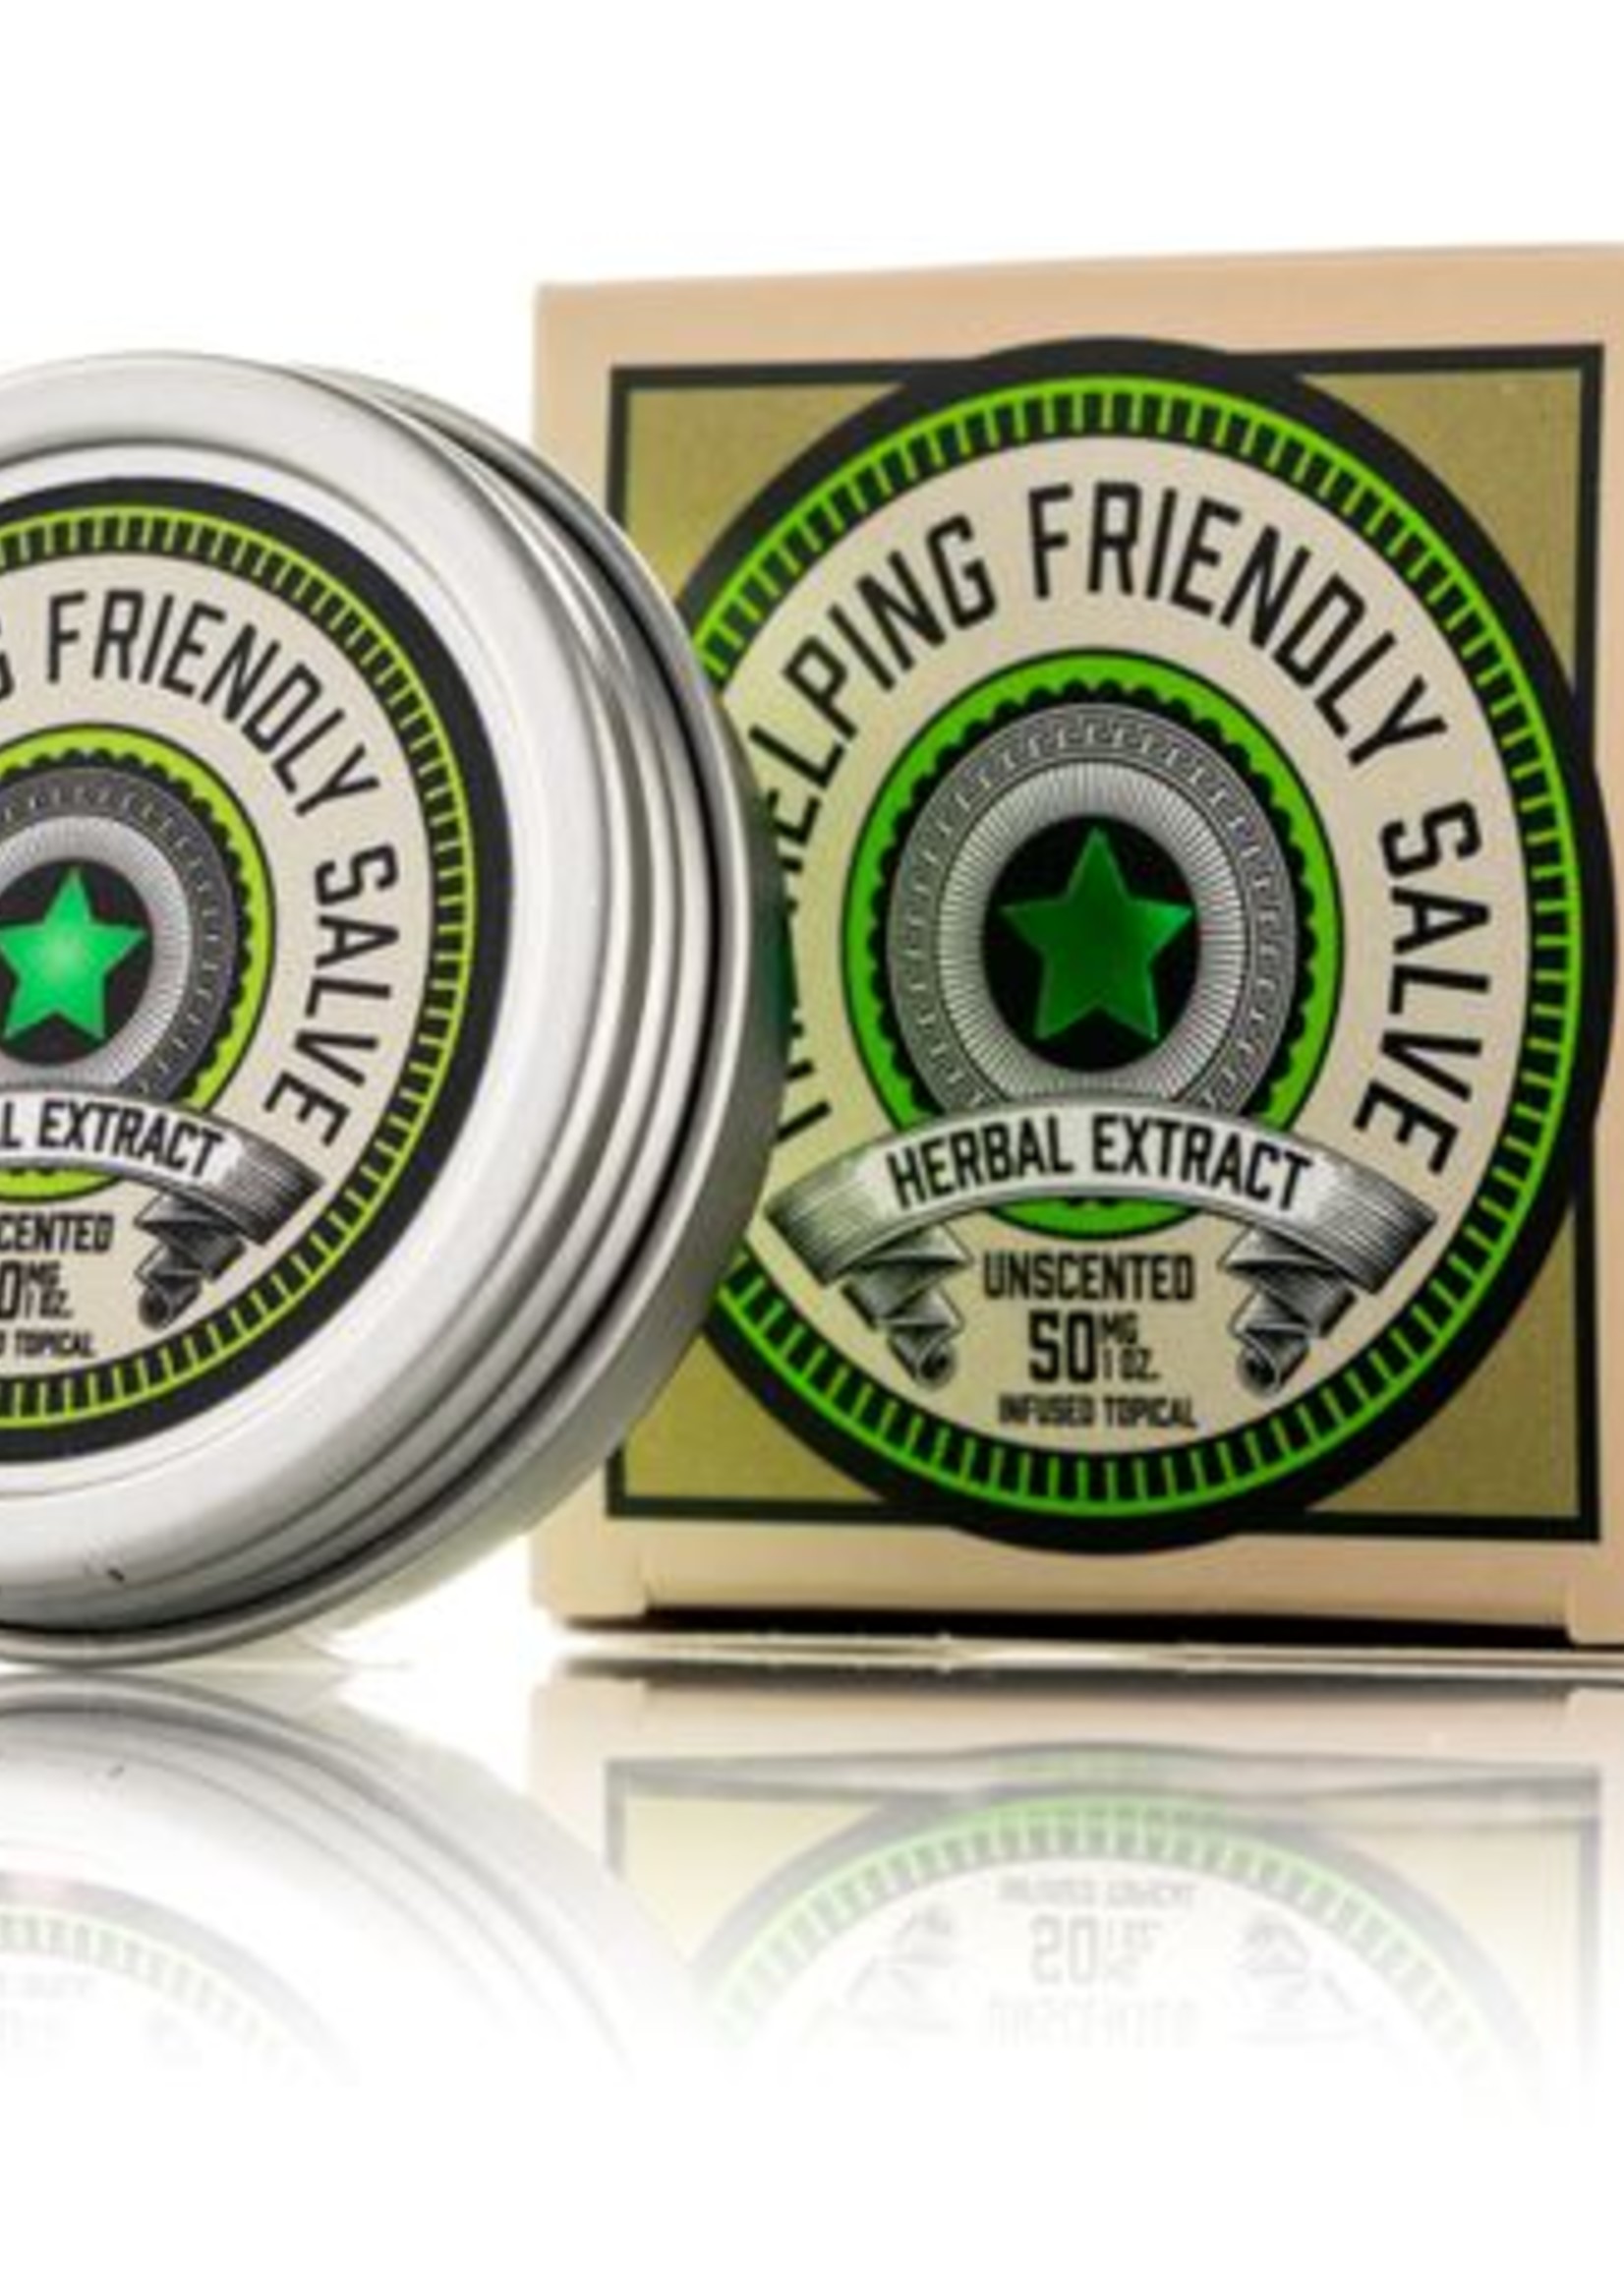 Vapejoose The Helping Friendly Salve - Unscented 50mg